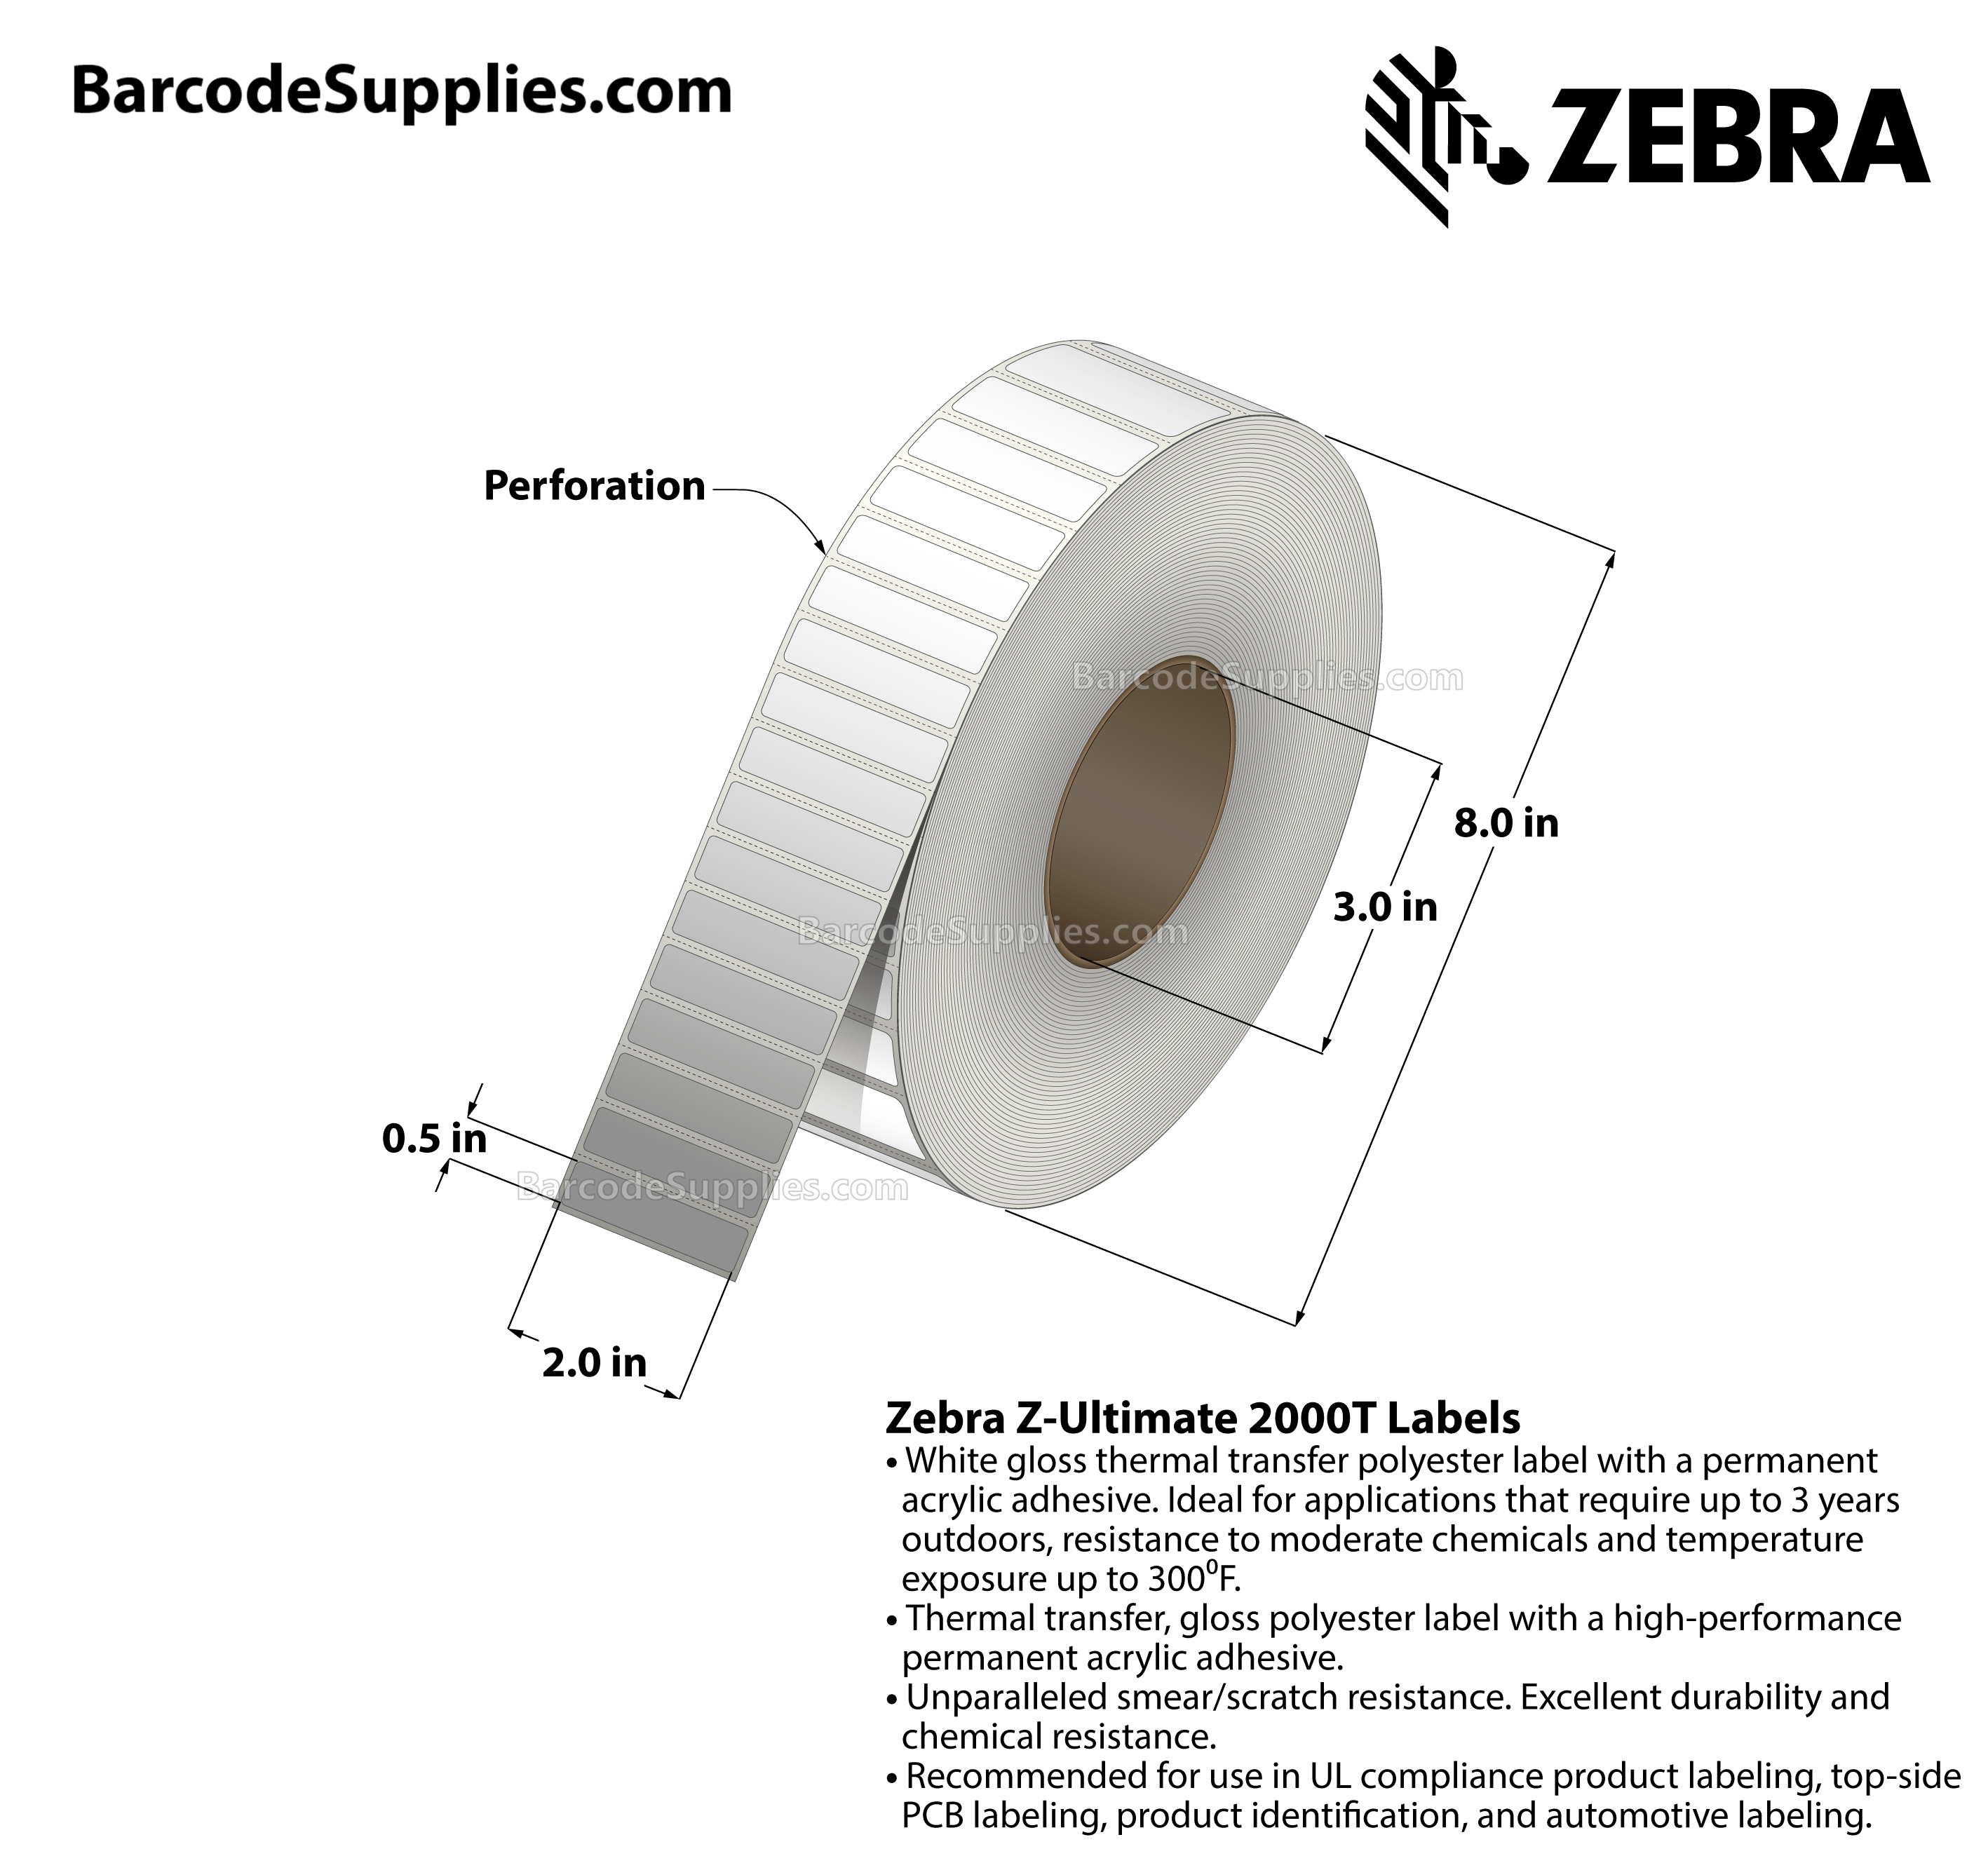 2 x 0.5 Thermal Transfer White Z-Ultimate 2000T Labels With Permanent Adhesive - Perforated - 9874 Labels Per Roll - Carton Of 4 Rolls - 39496 Labels Total - MPN: 10011985